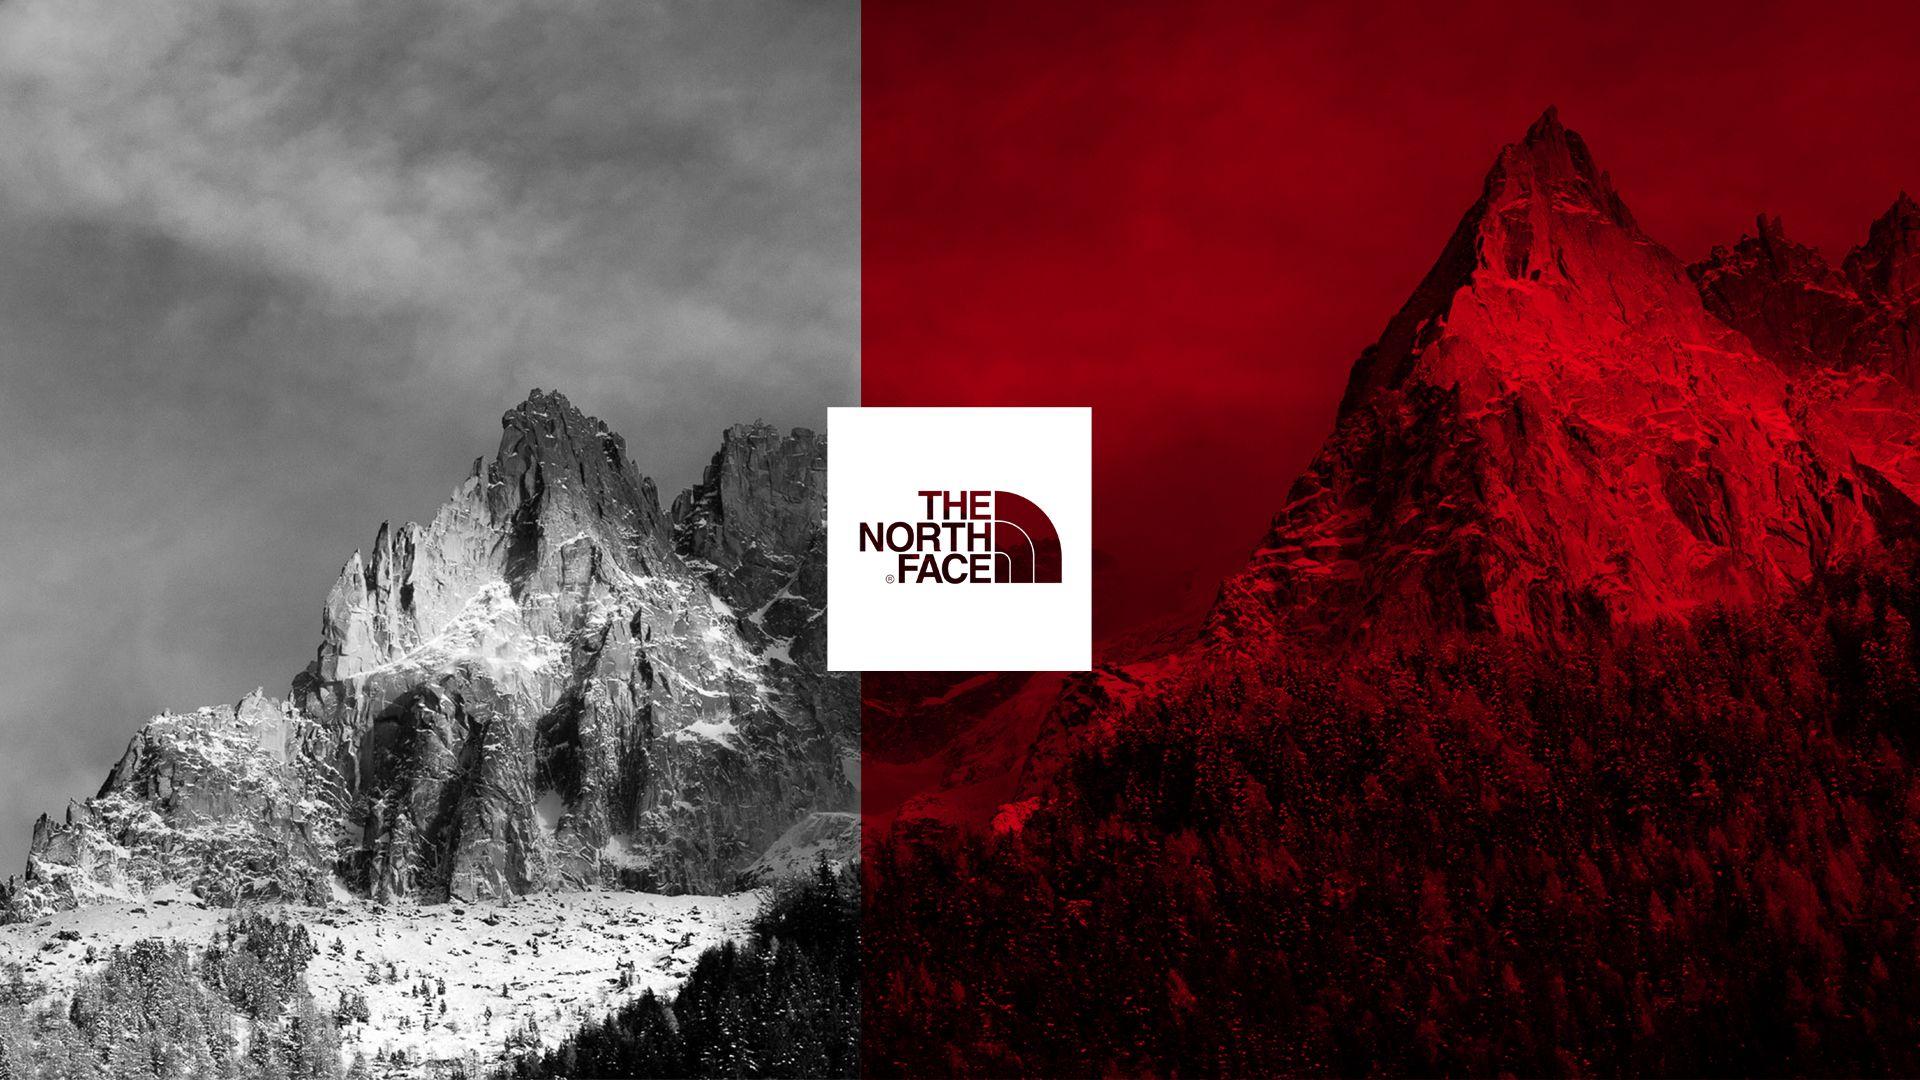 The North Face wallpaper by Cerbul23  Download on ZEDGE  1f8d